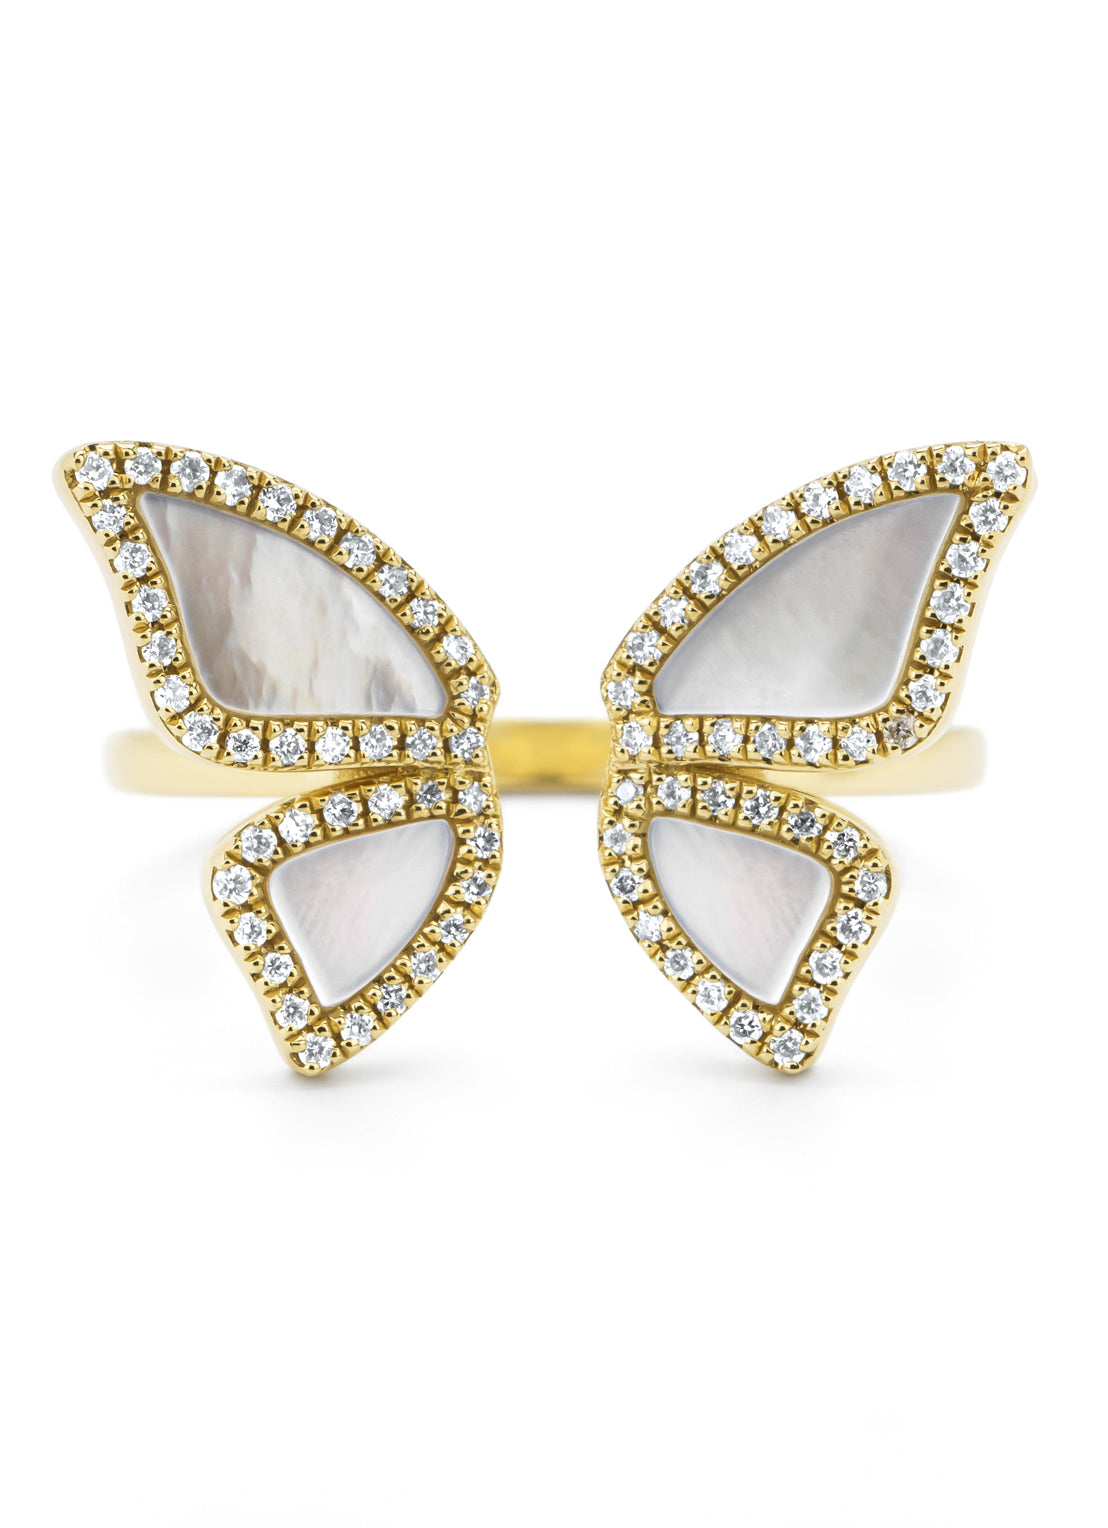 Yellow gold ring, 0.20 ct diamond, butterfly kisses